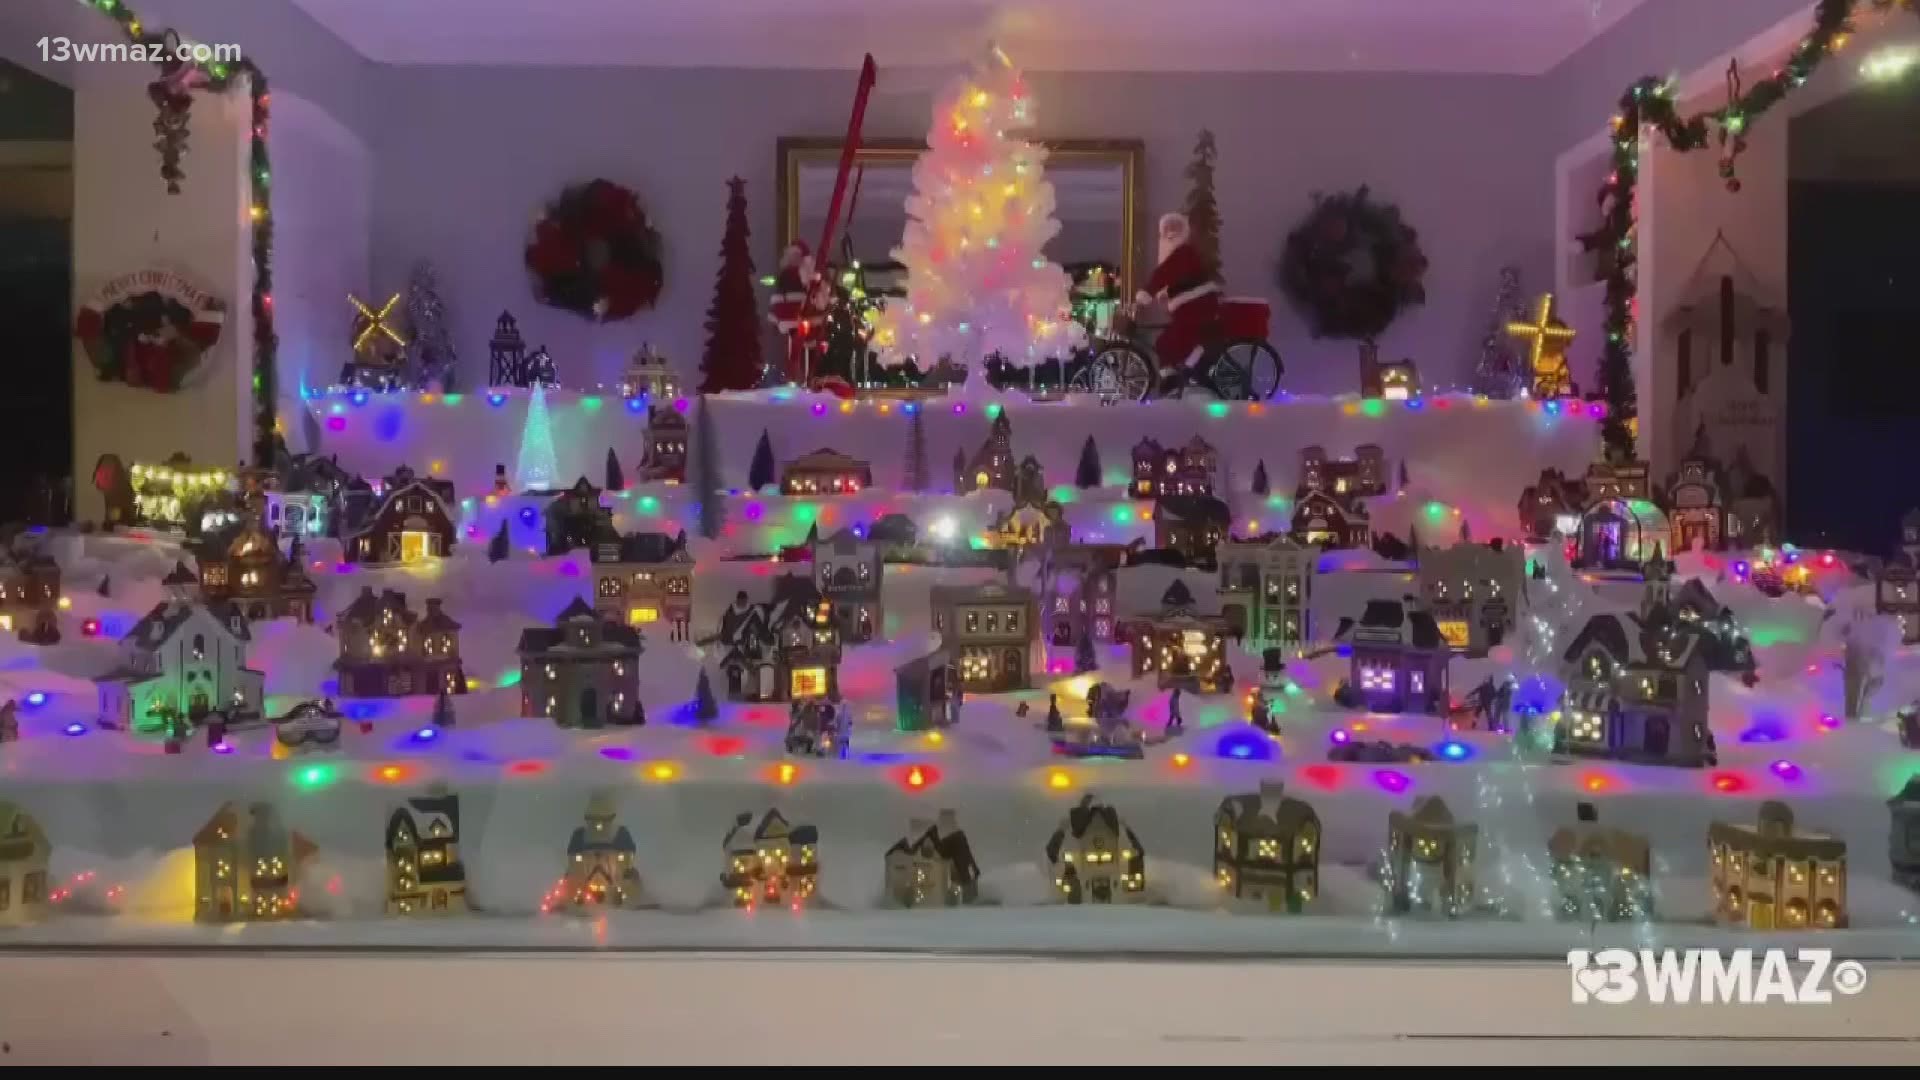 The Rileys have a Christmas village that they've welcomed families to enjoy over the years, and the display continues to grow.